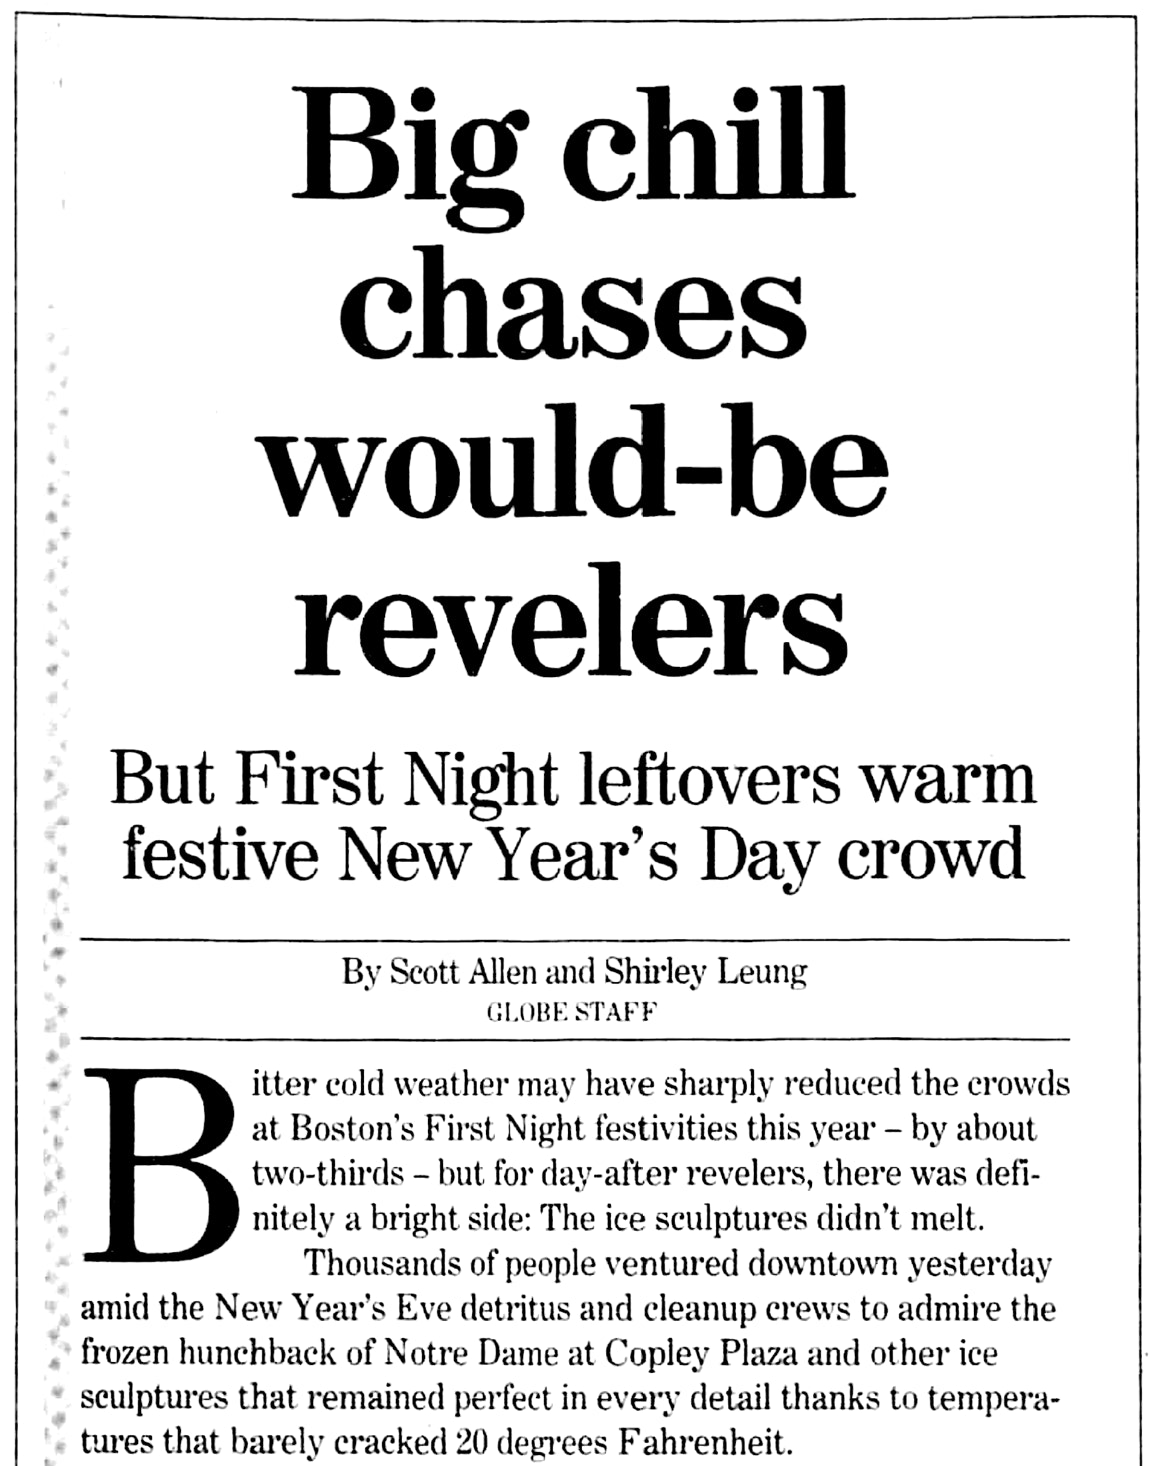 Boston Globe article on the 1996 First Night celebration mentioning the cold temperature.